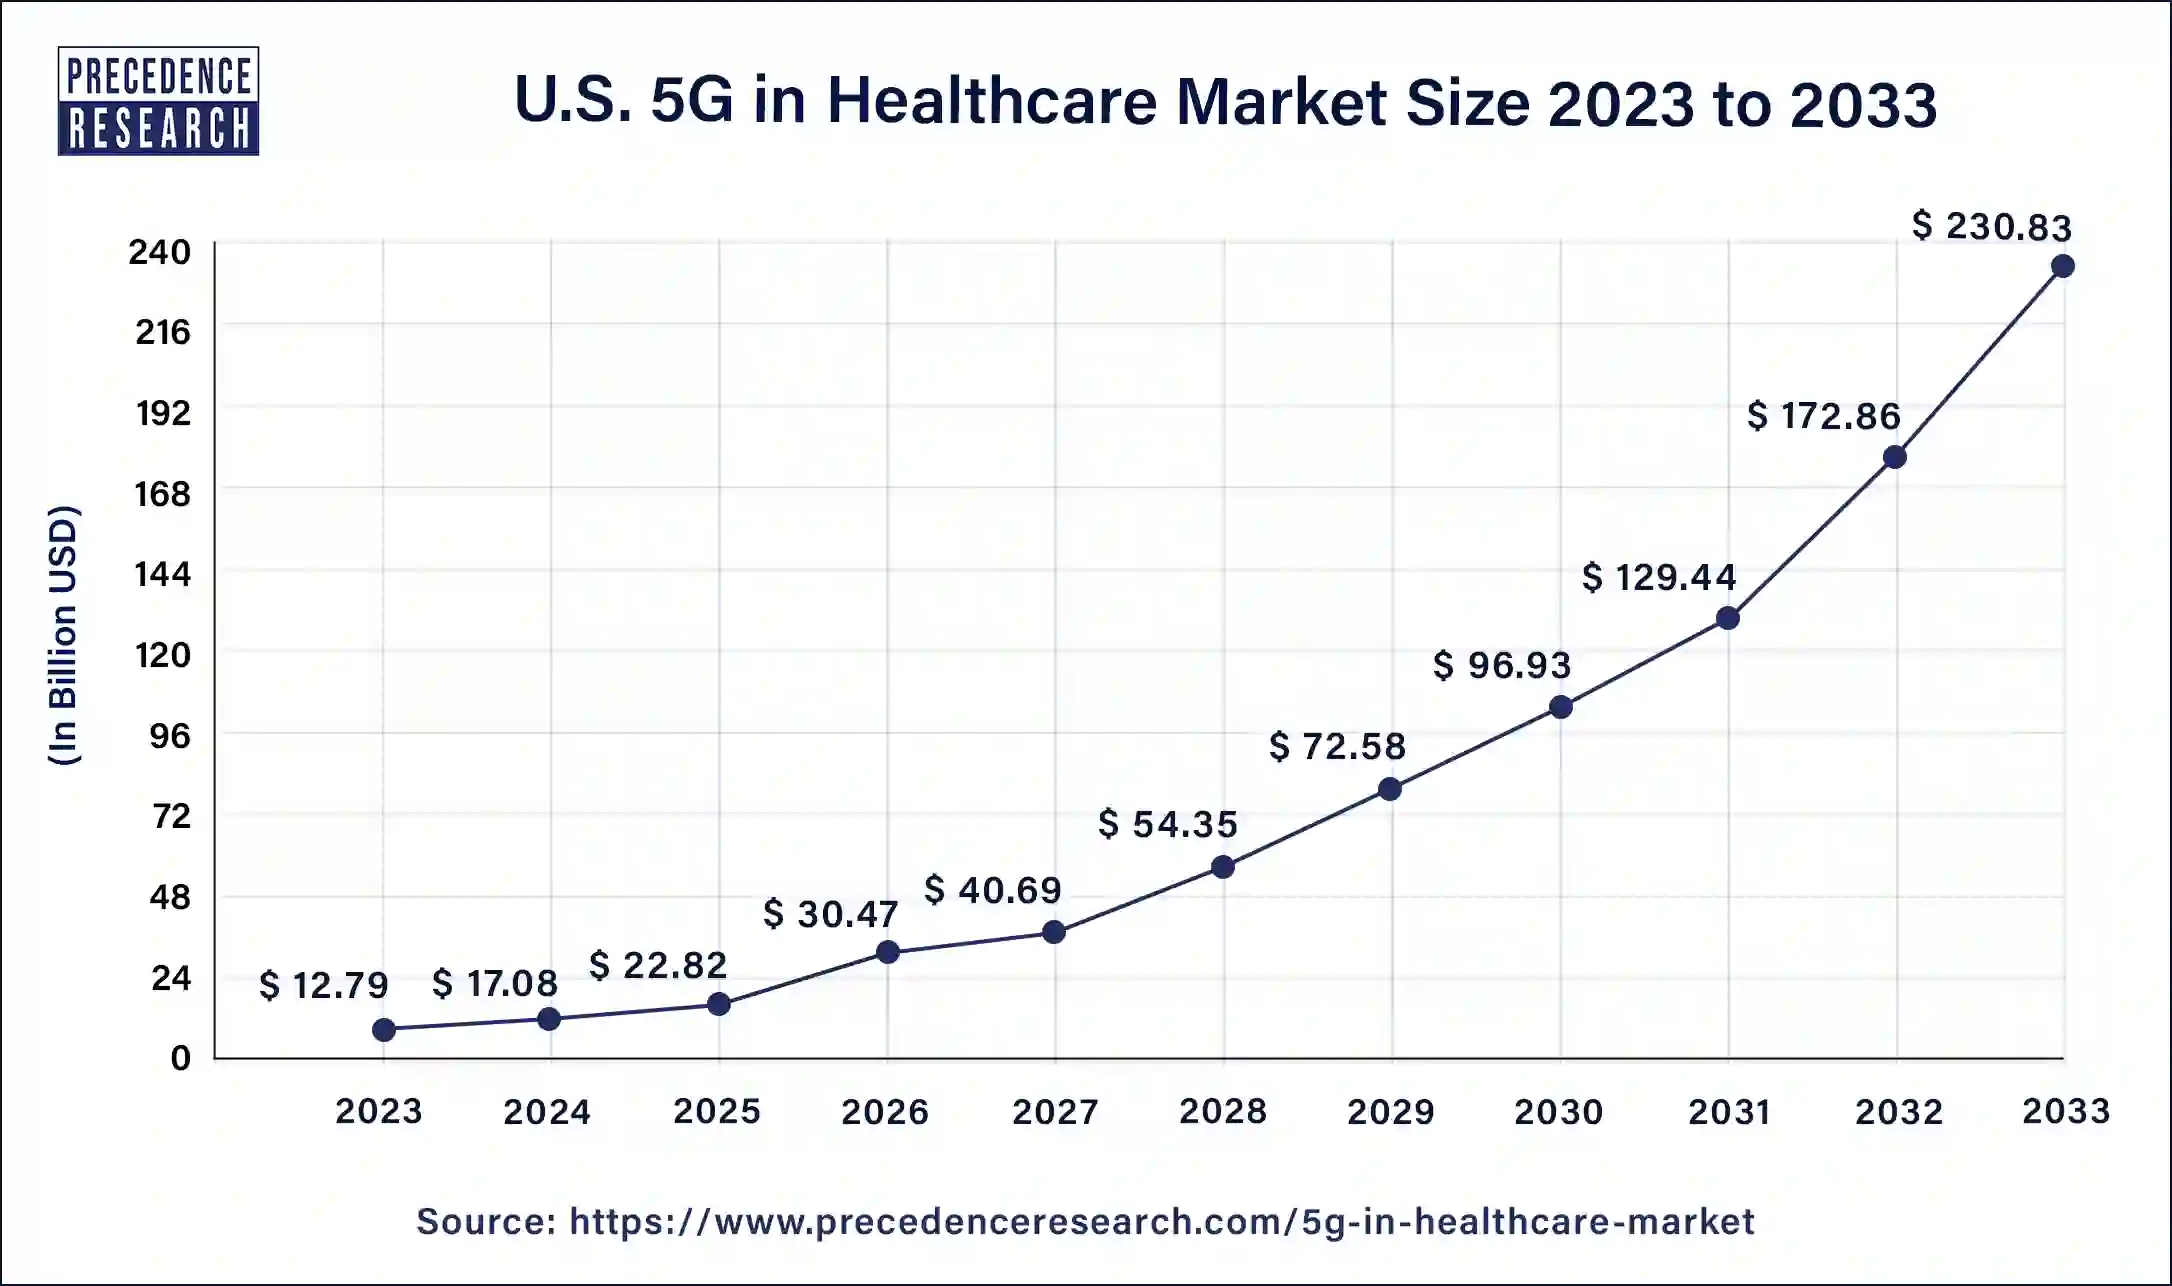 U.S. 5G in Healthcare Market Size 2024 to 2033